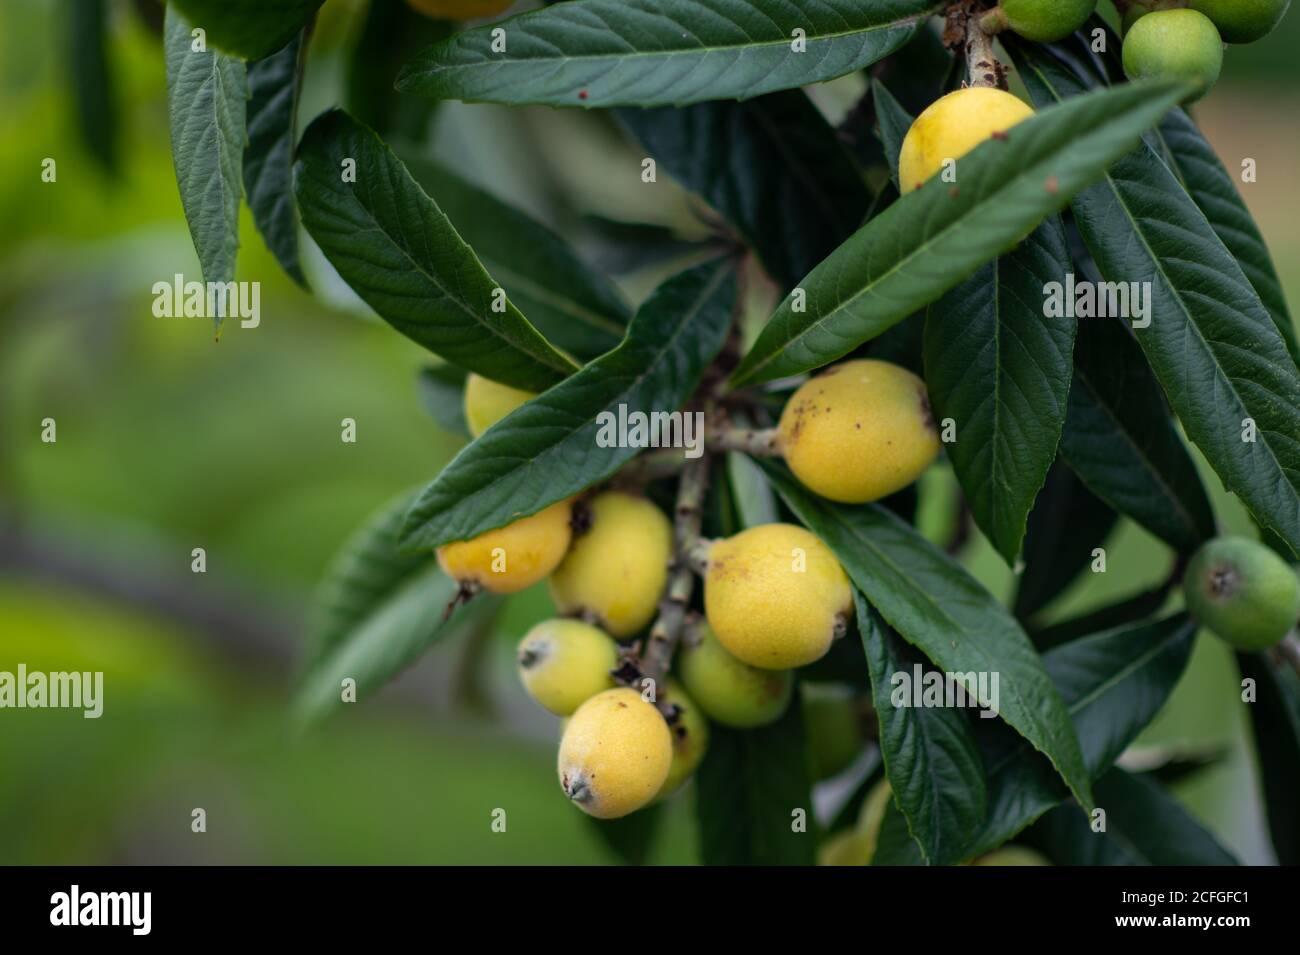 Loquat tree with fruits on it Stock Photo